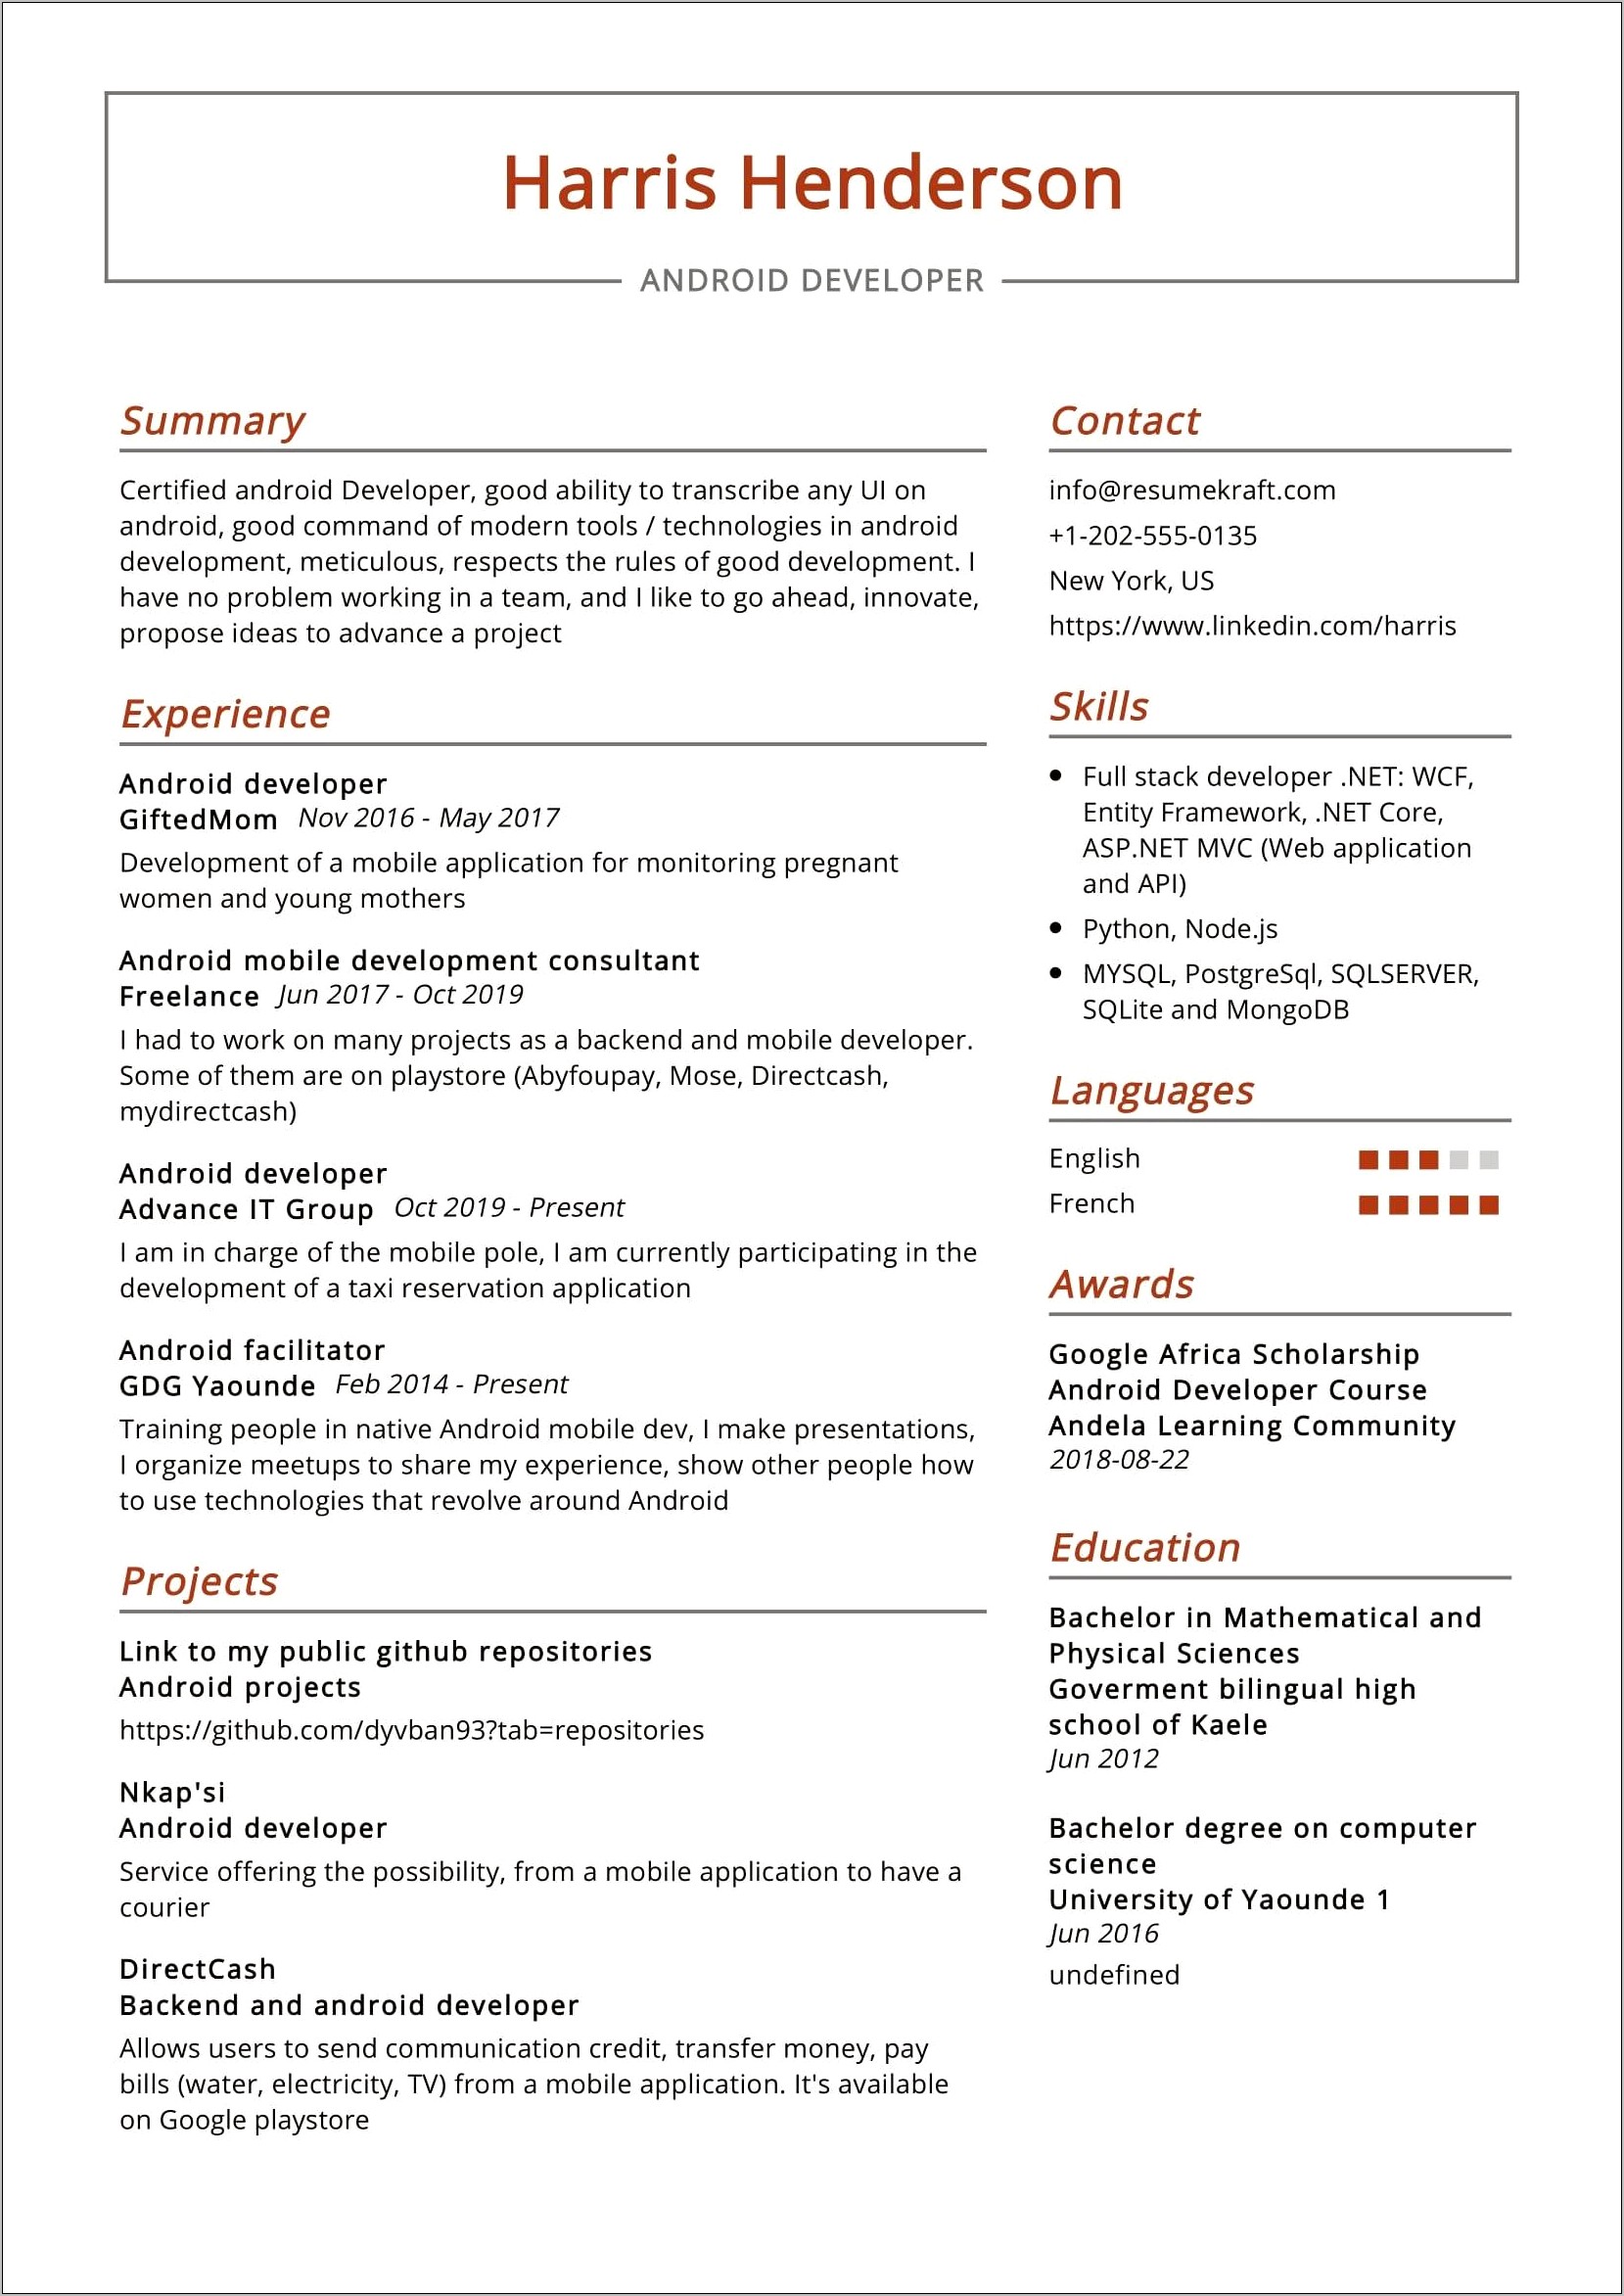 Resume For Freelance Web Designer With No Experience